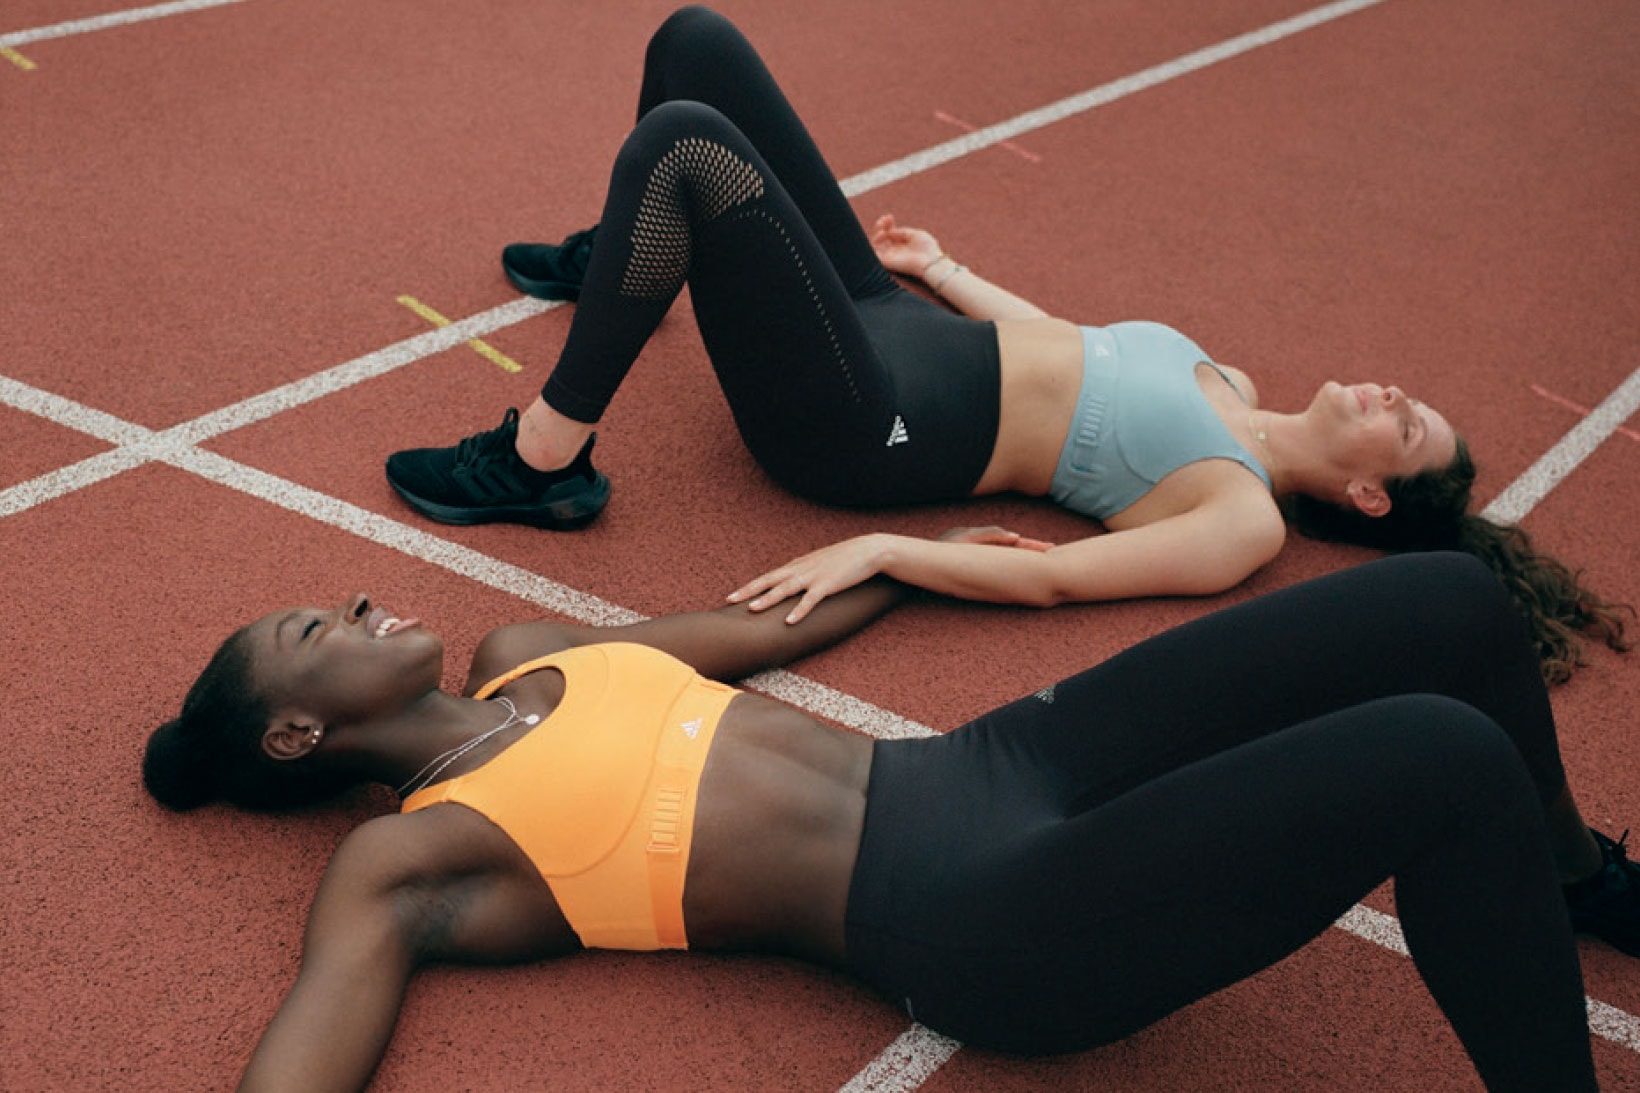 Adidas introduces more than 70 sports bra sizes